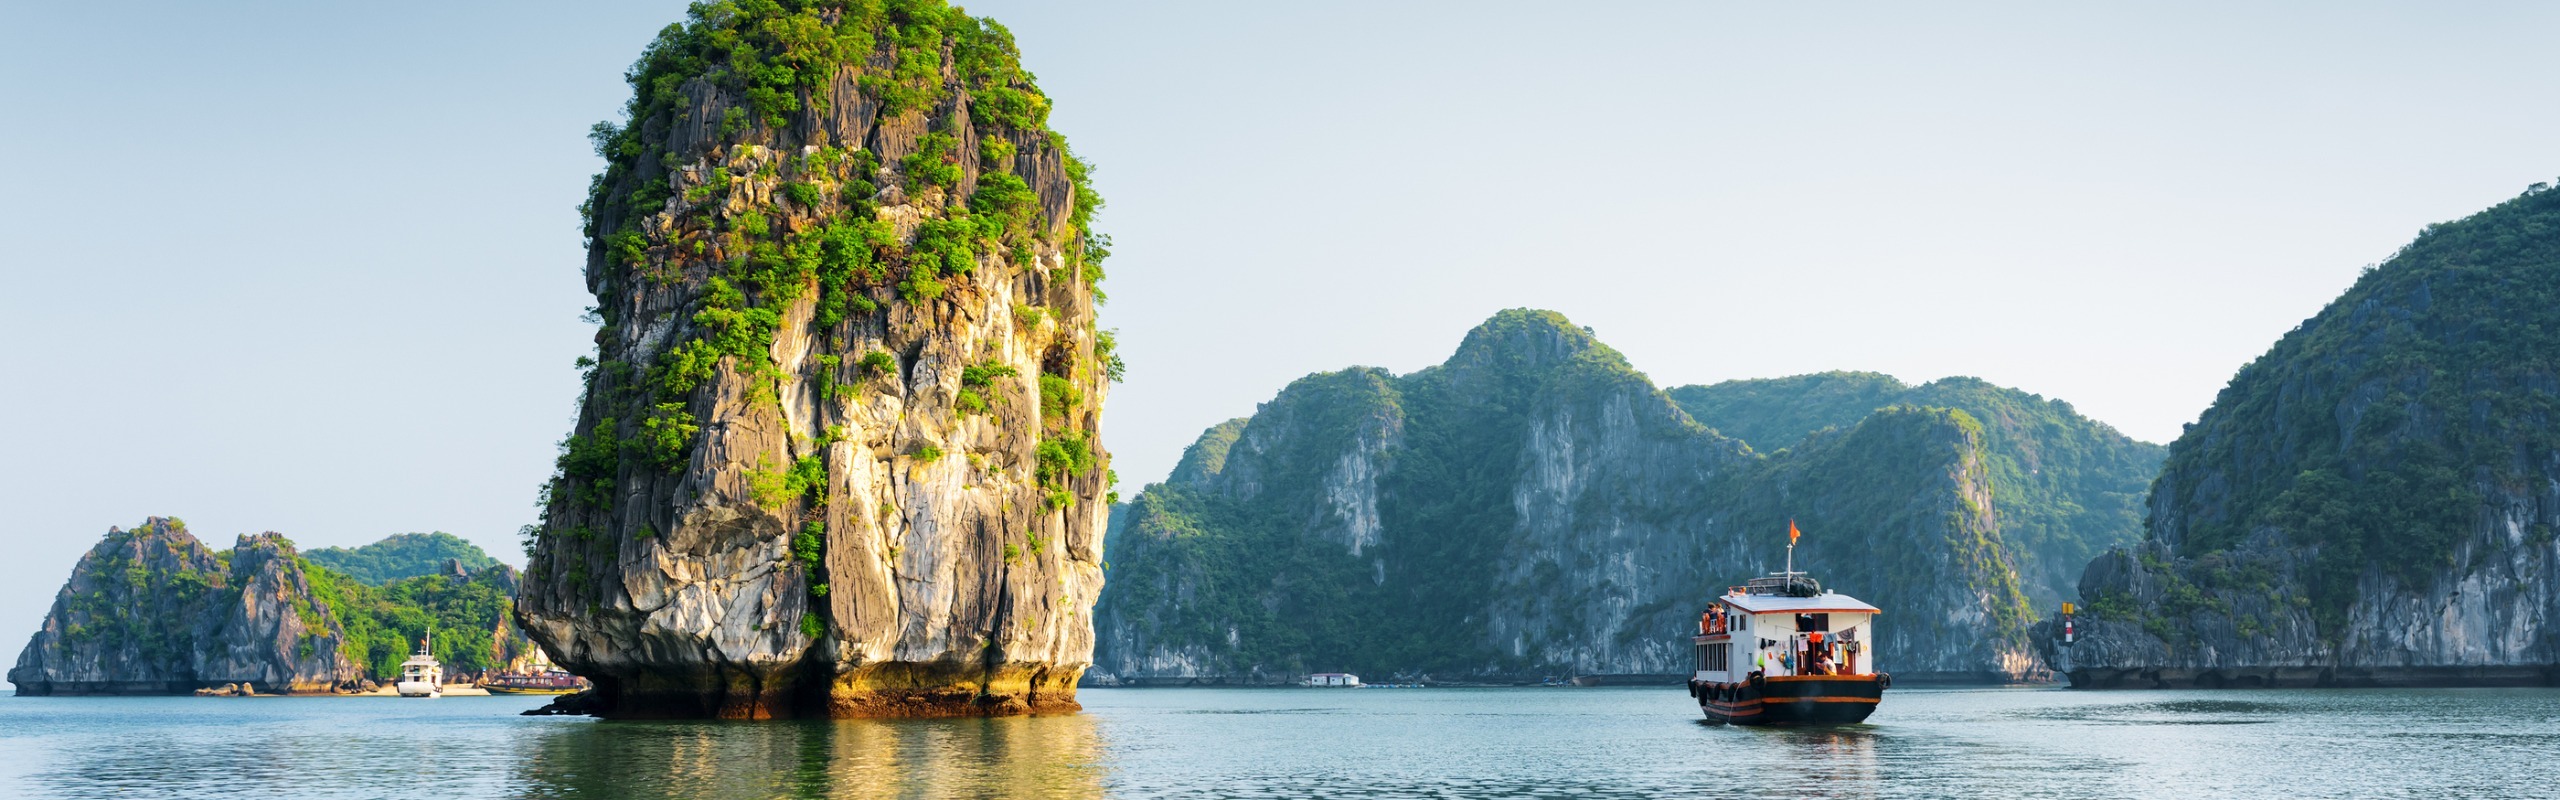 7 Days in Vietnam: 6 Best Itinerary Ideas for First Timers, Families and Couples